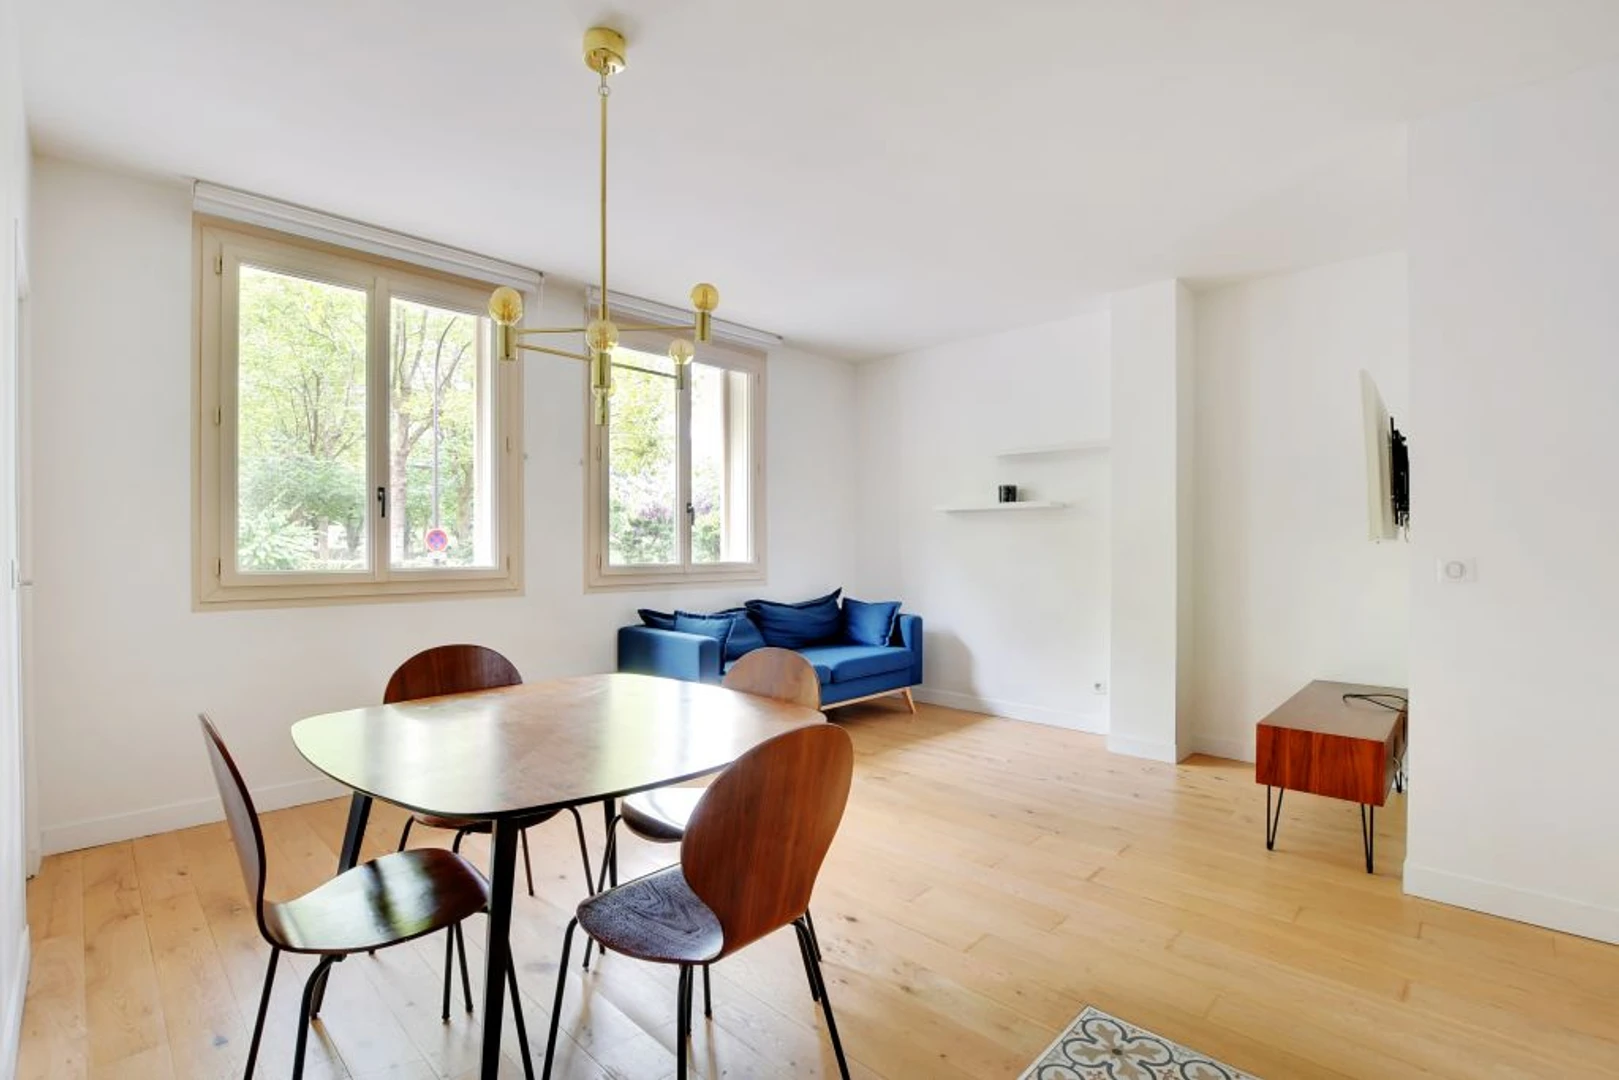 Modern and bright flat in boulogne-billancourt